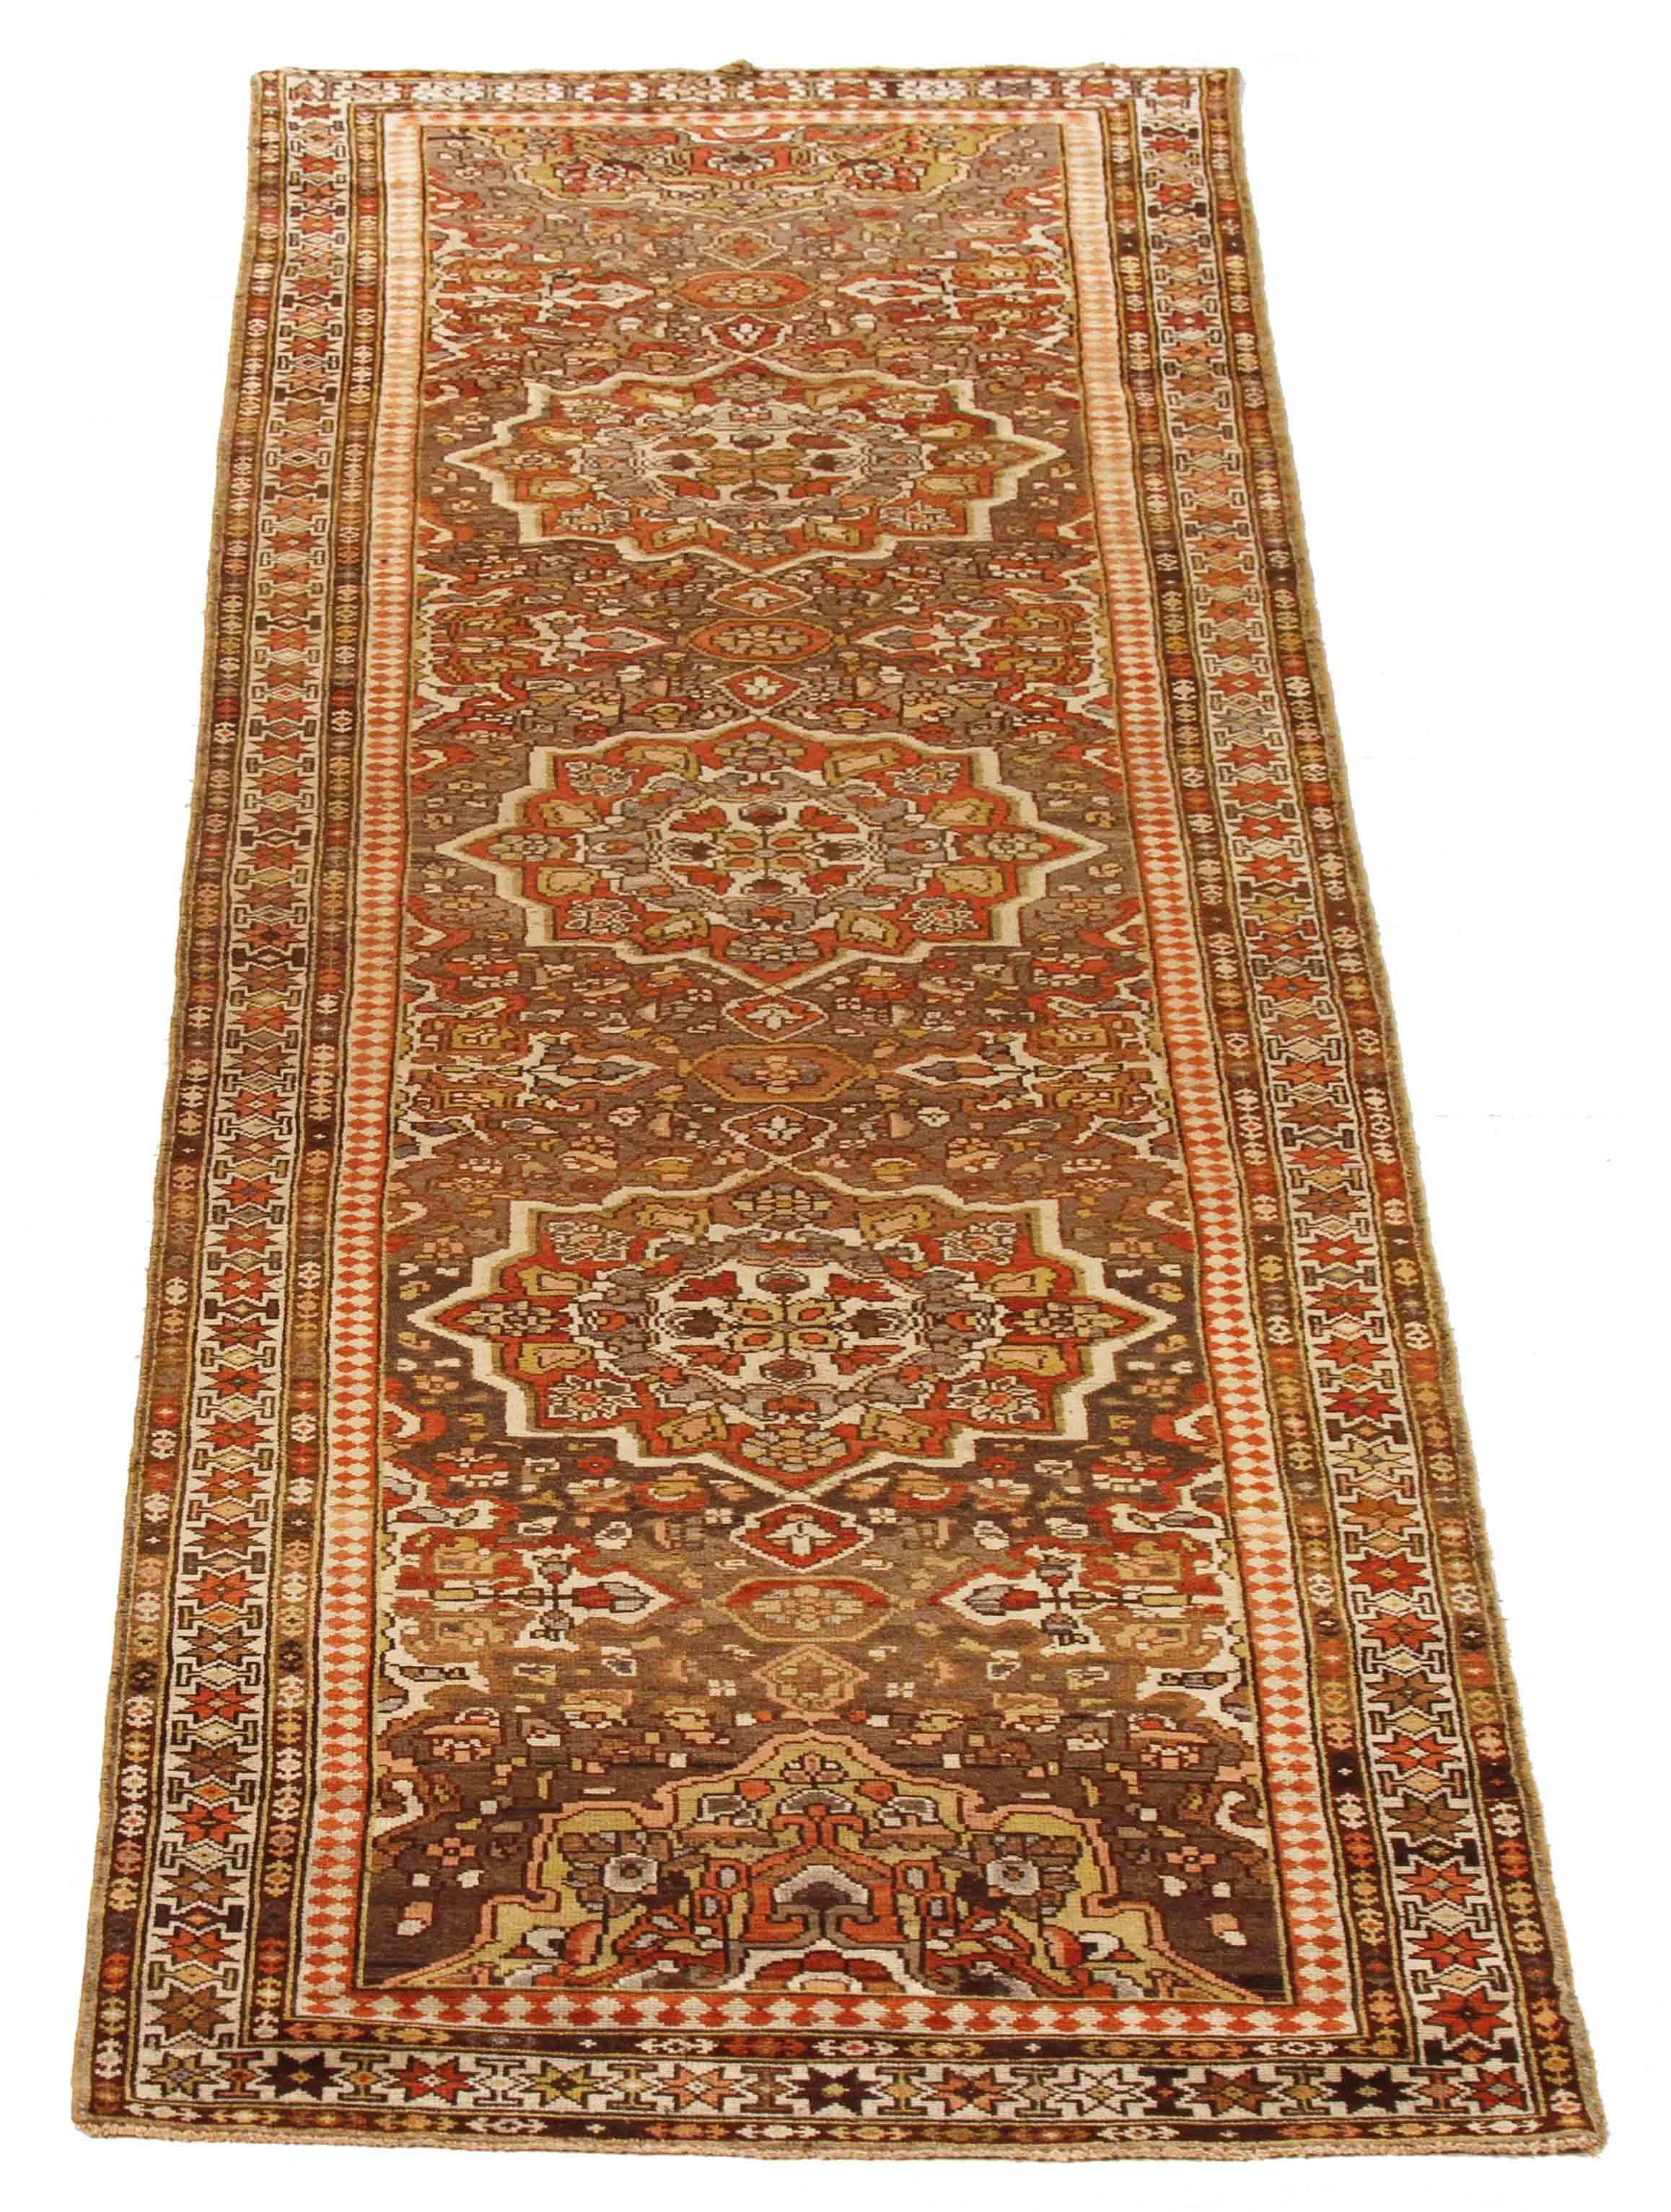 Antique Persian Rug Bakhtiari Design with Ornate Floral Patterns, circa 1940s In Excellent Condition For Sale In Dallas, TX